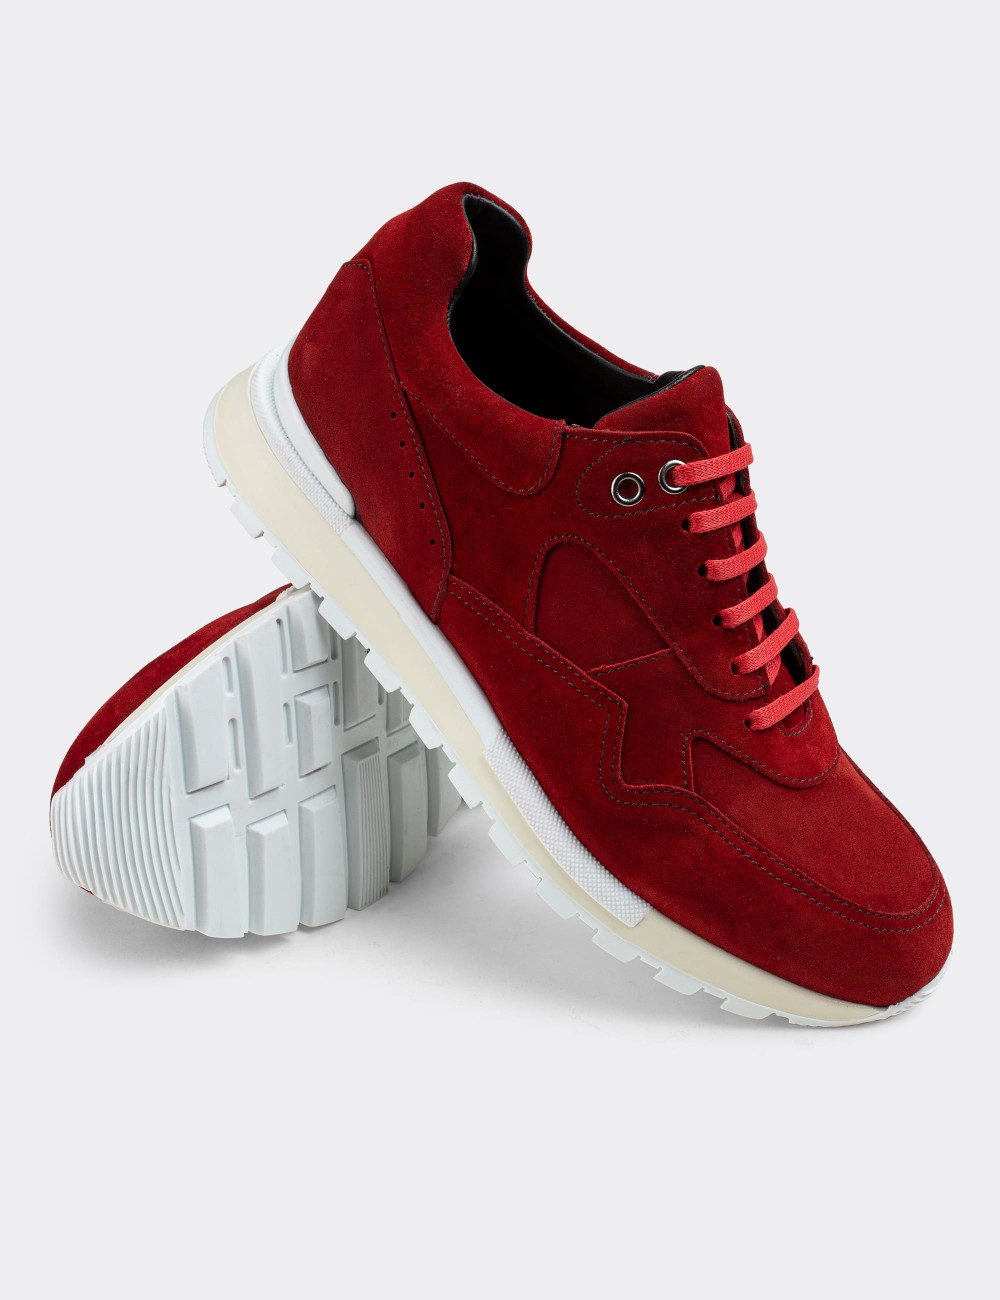 Red Suede Leather Sneakers - 01818MKRMT01